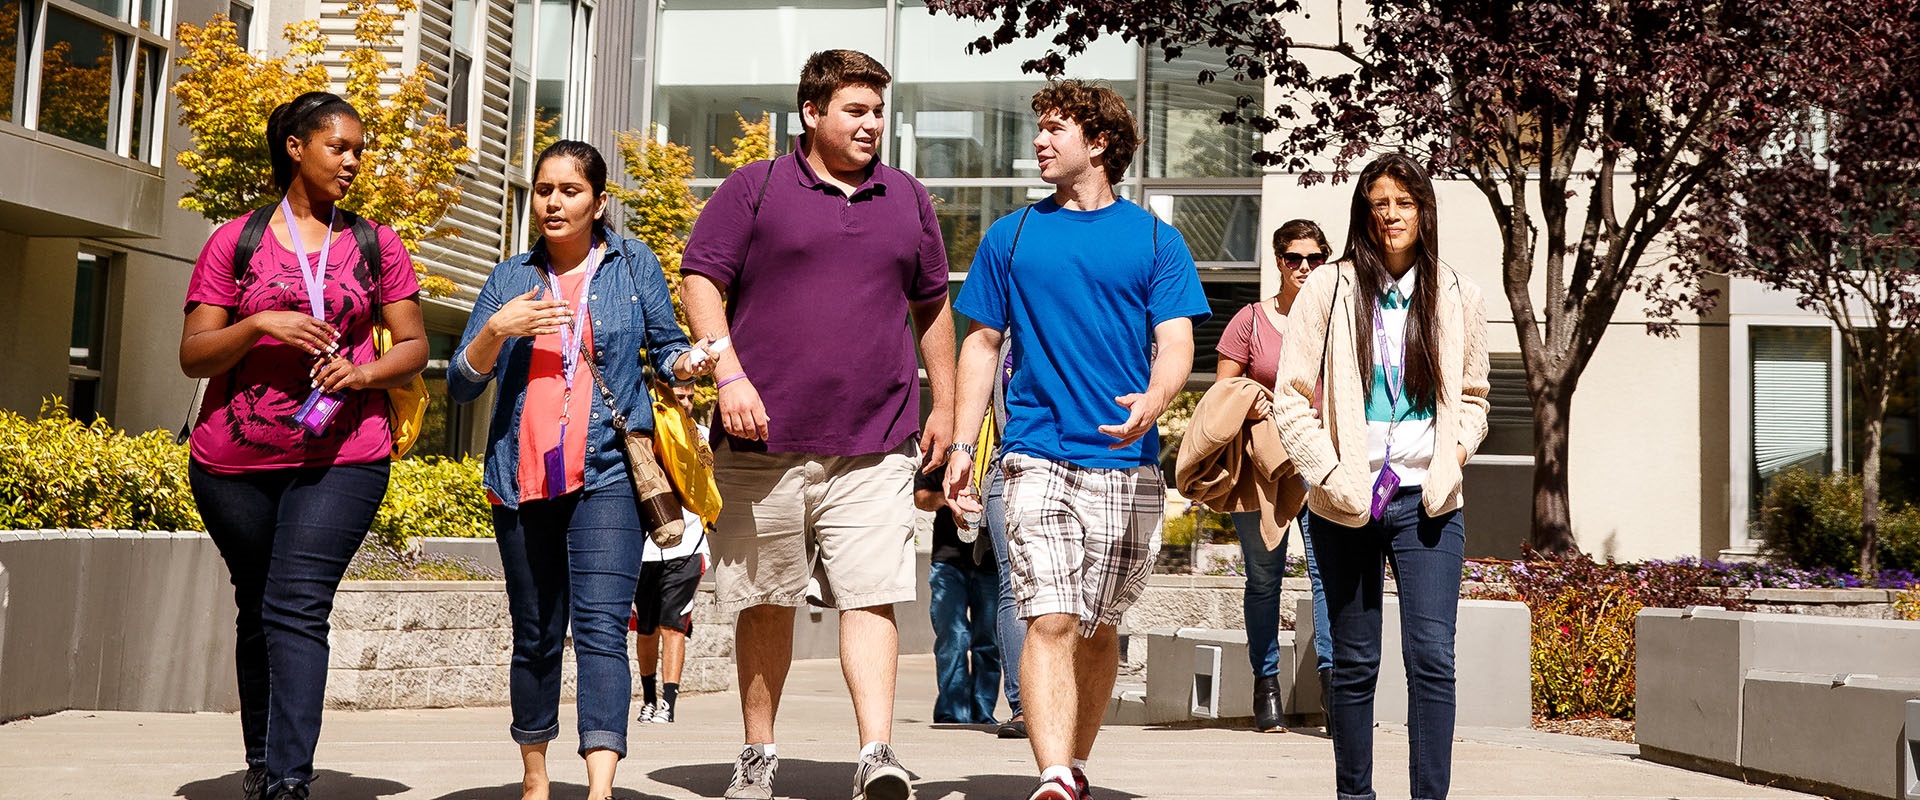 Students walking onto campus